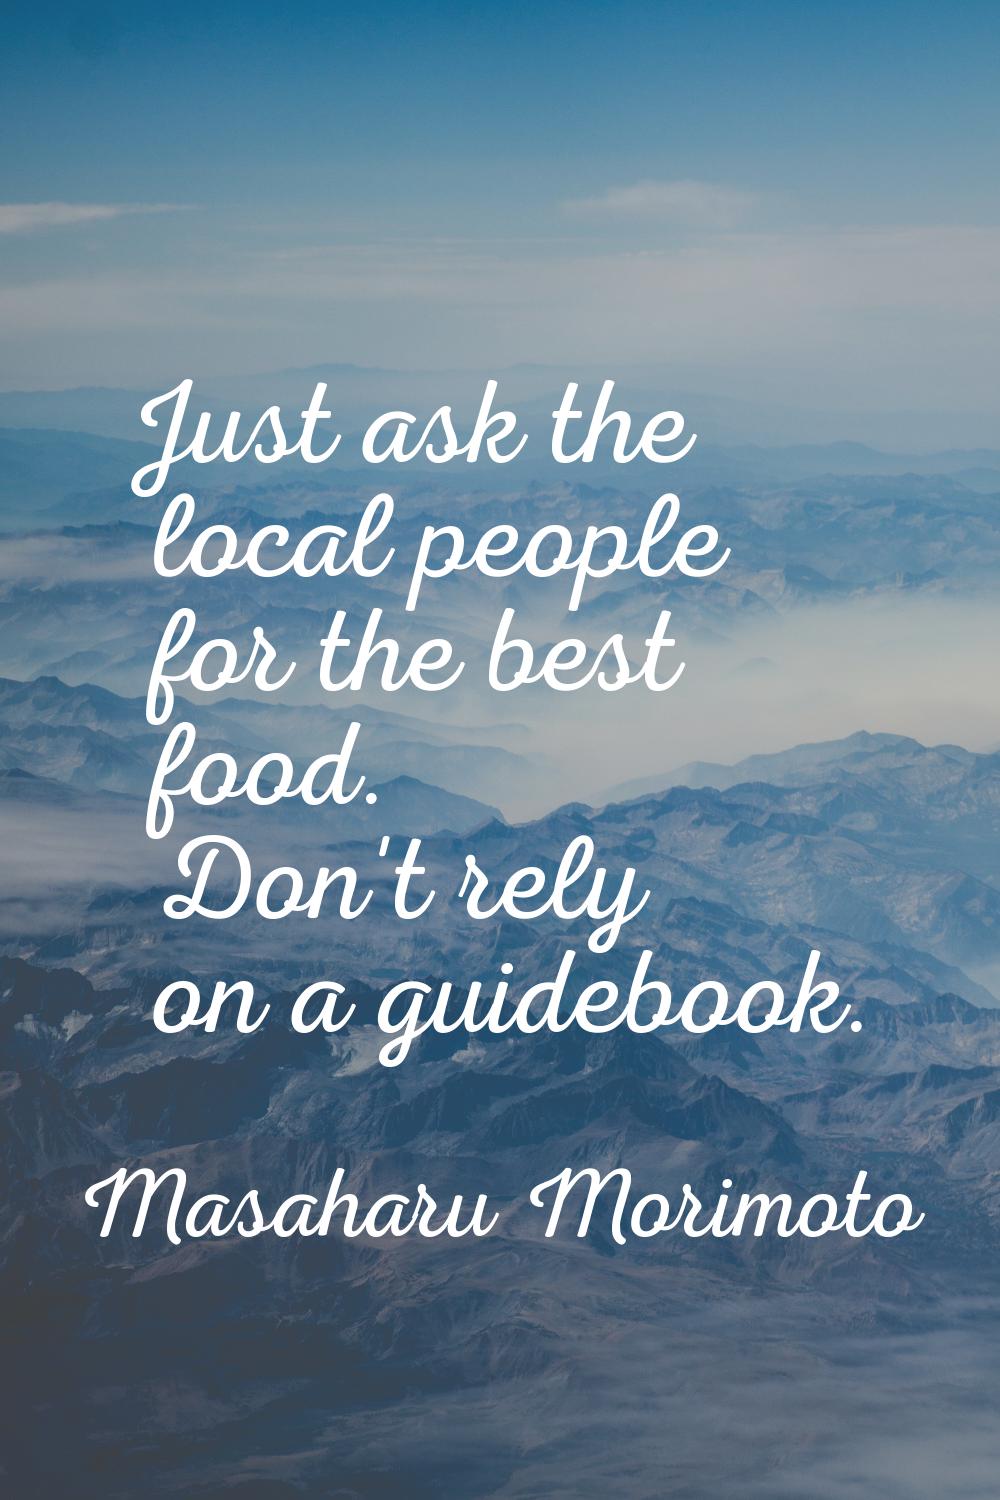 Just ask the local people for the best food. Don't rely on a guidebook.